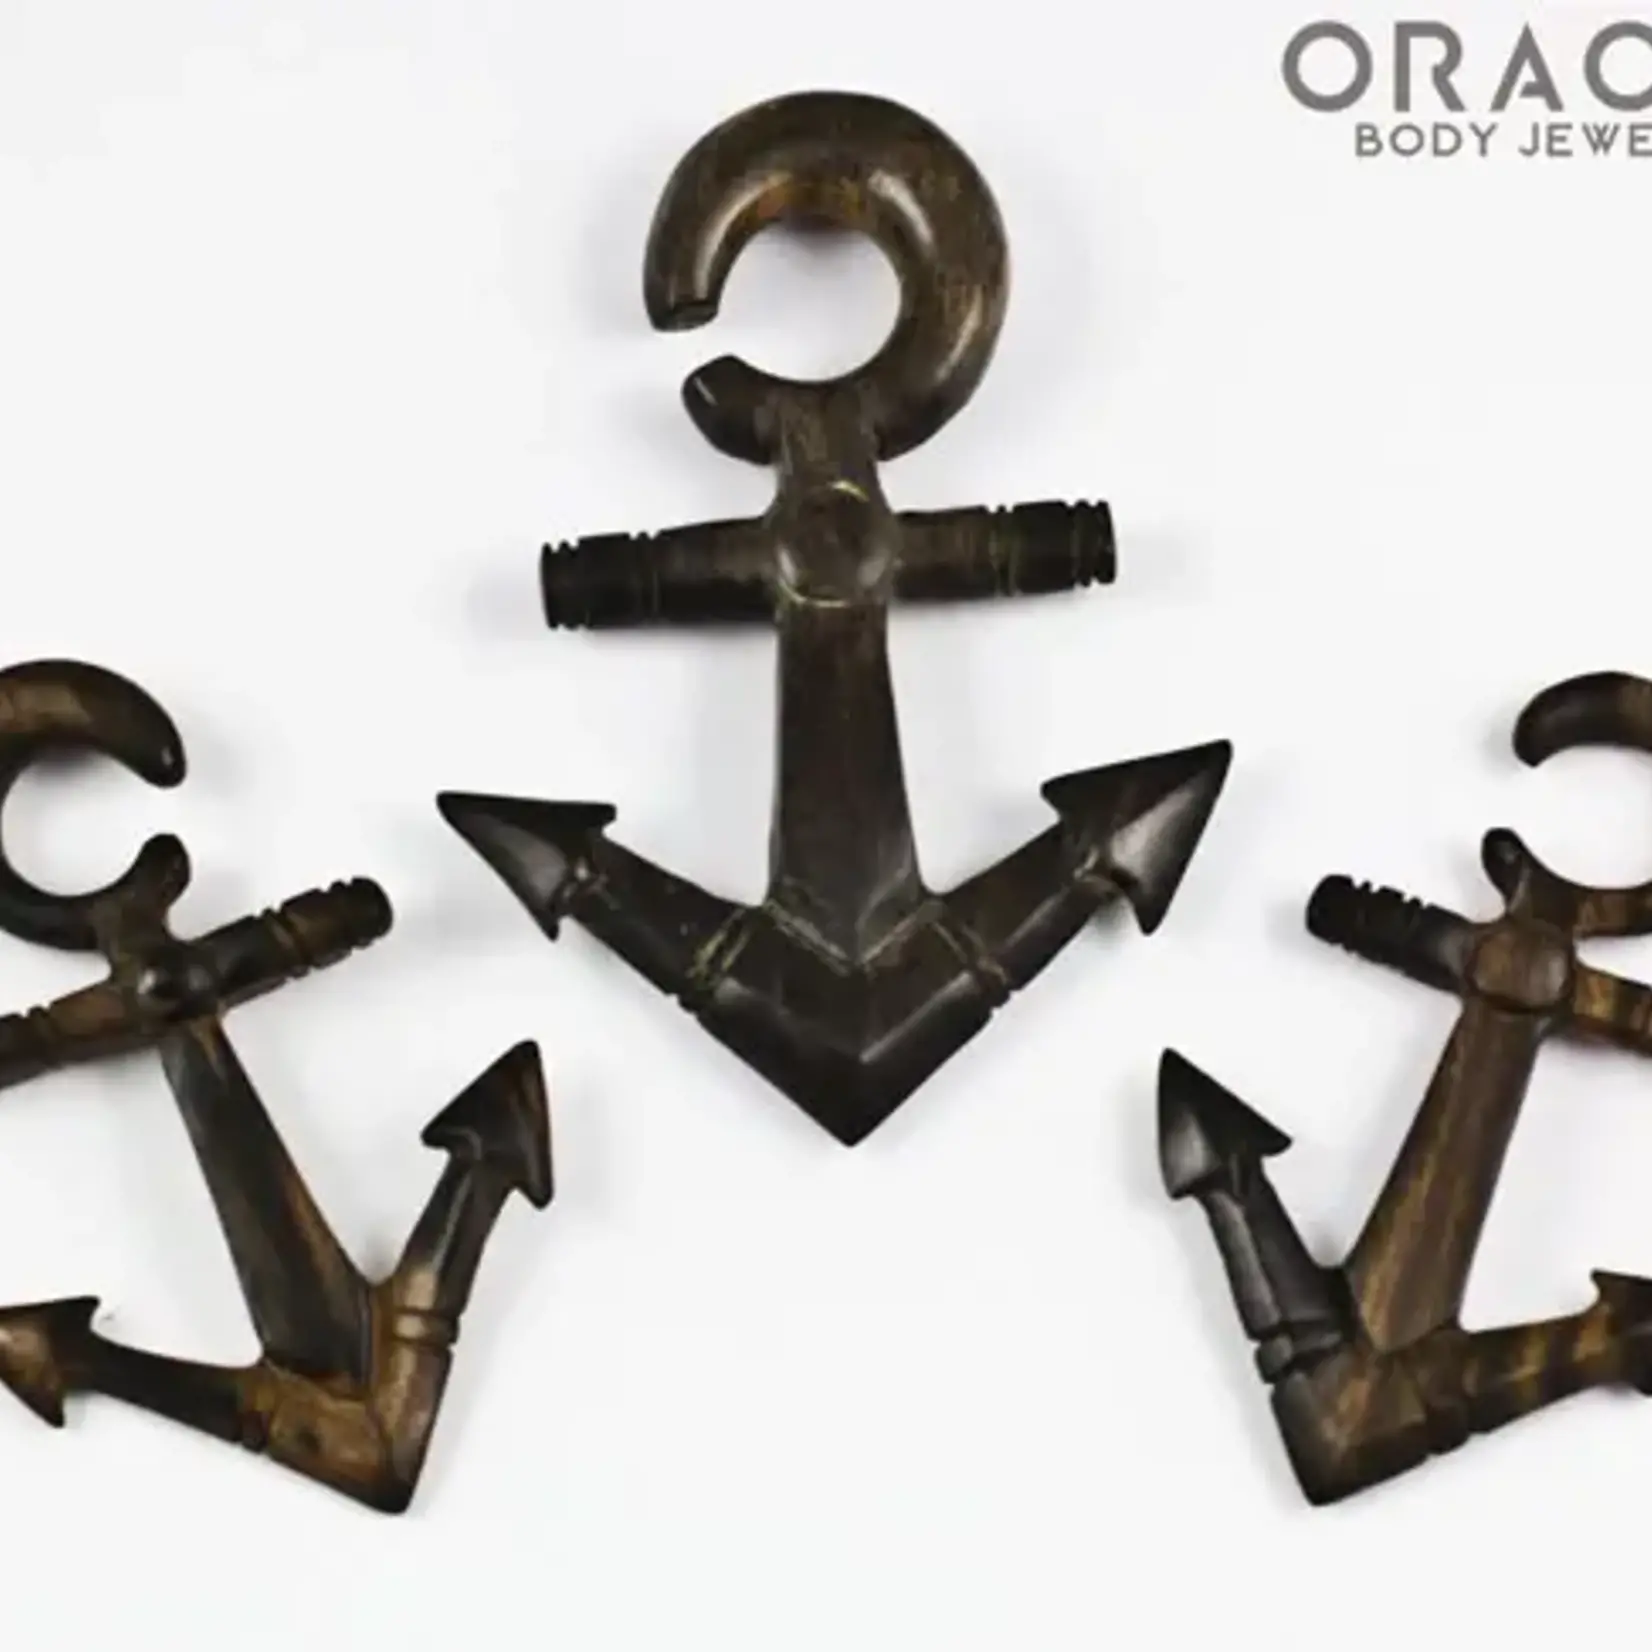 Oracle Oracle Body Jewelry 2g Zebra Wood "Anchors Away" hanging design